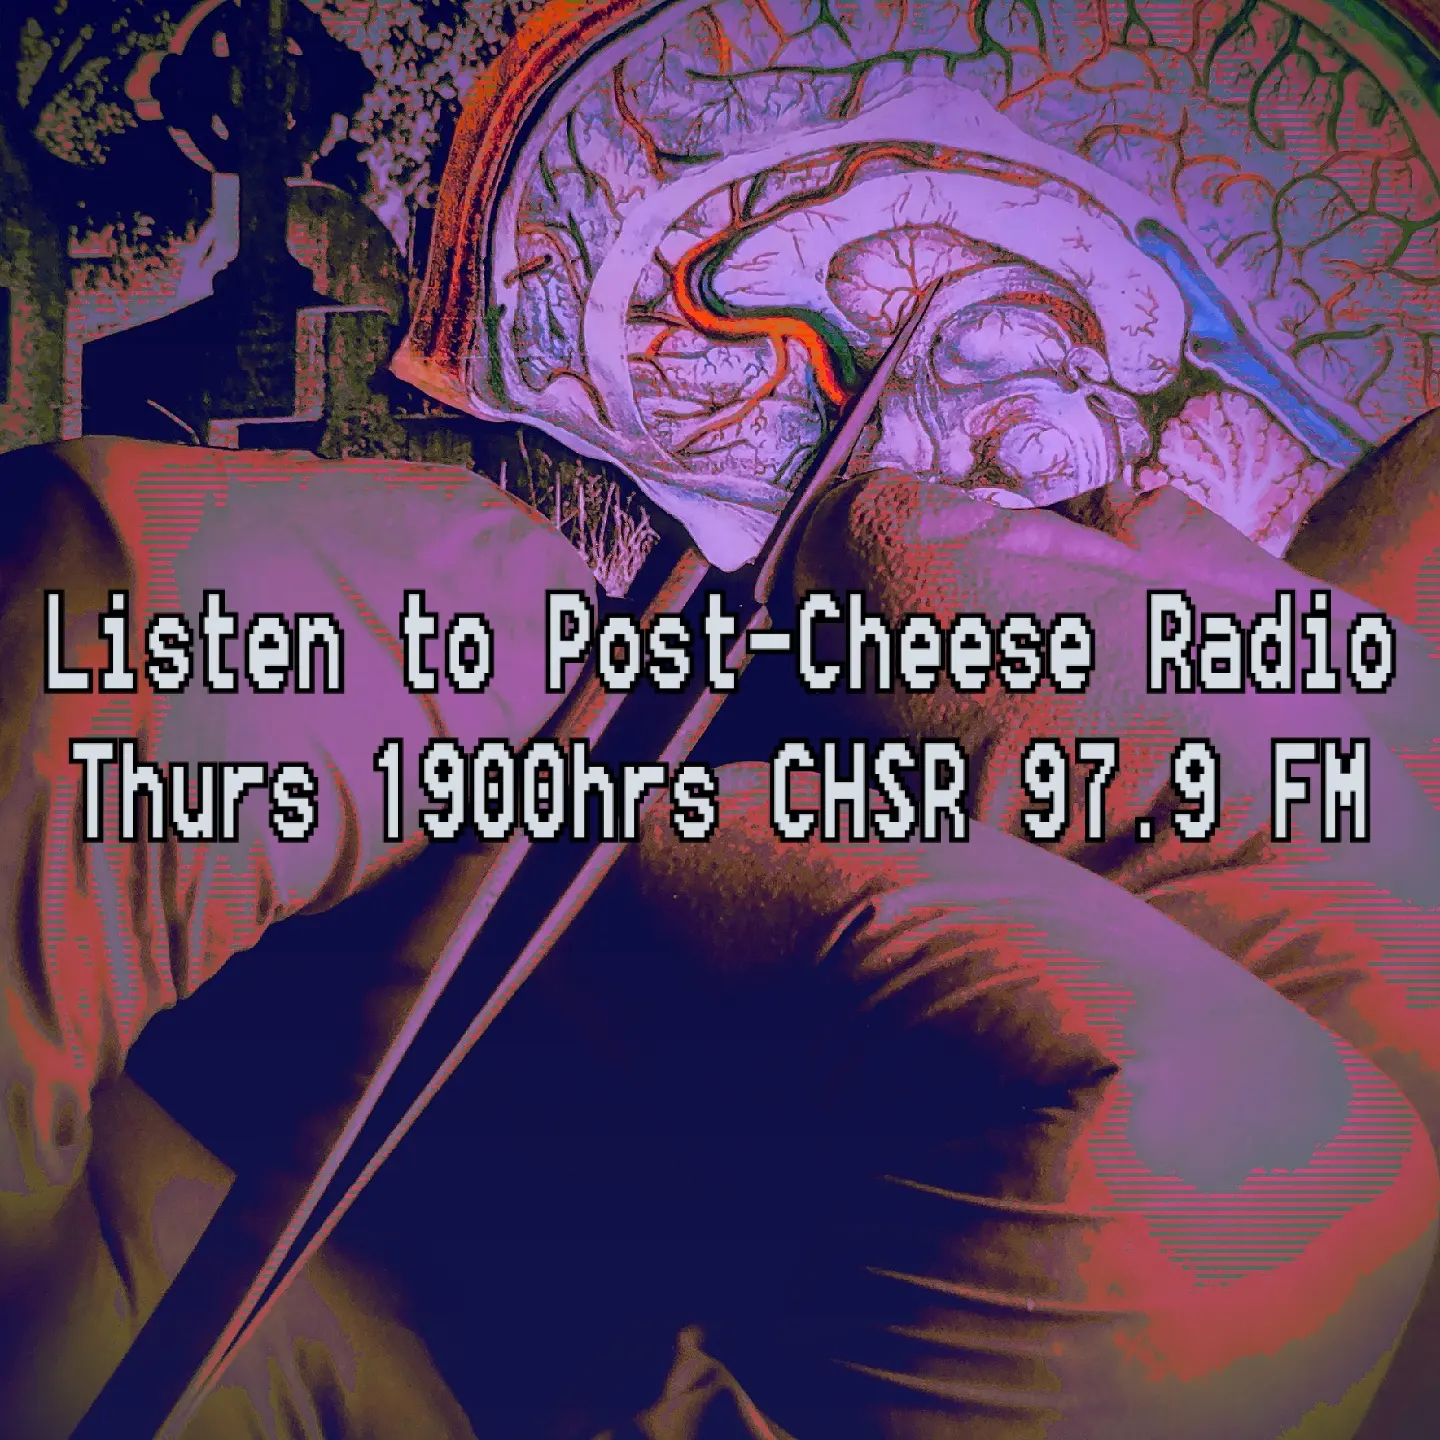 Collage art of a surgeon picking a brain with a graveyard seen in the background. Text tells viewers to listen to Post-Cheese Radio on CHSR Thursdays at 7.